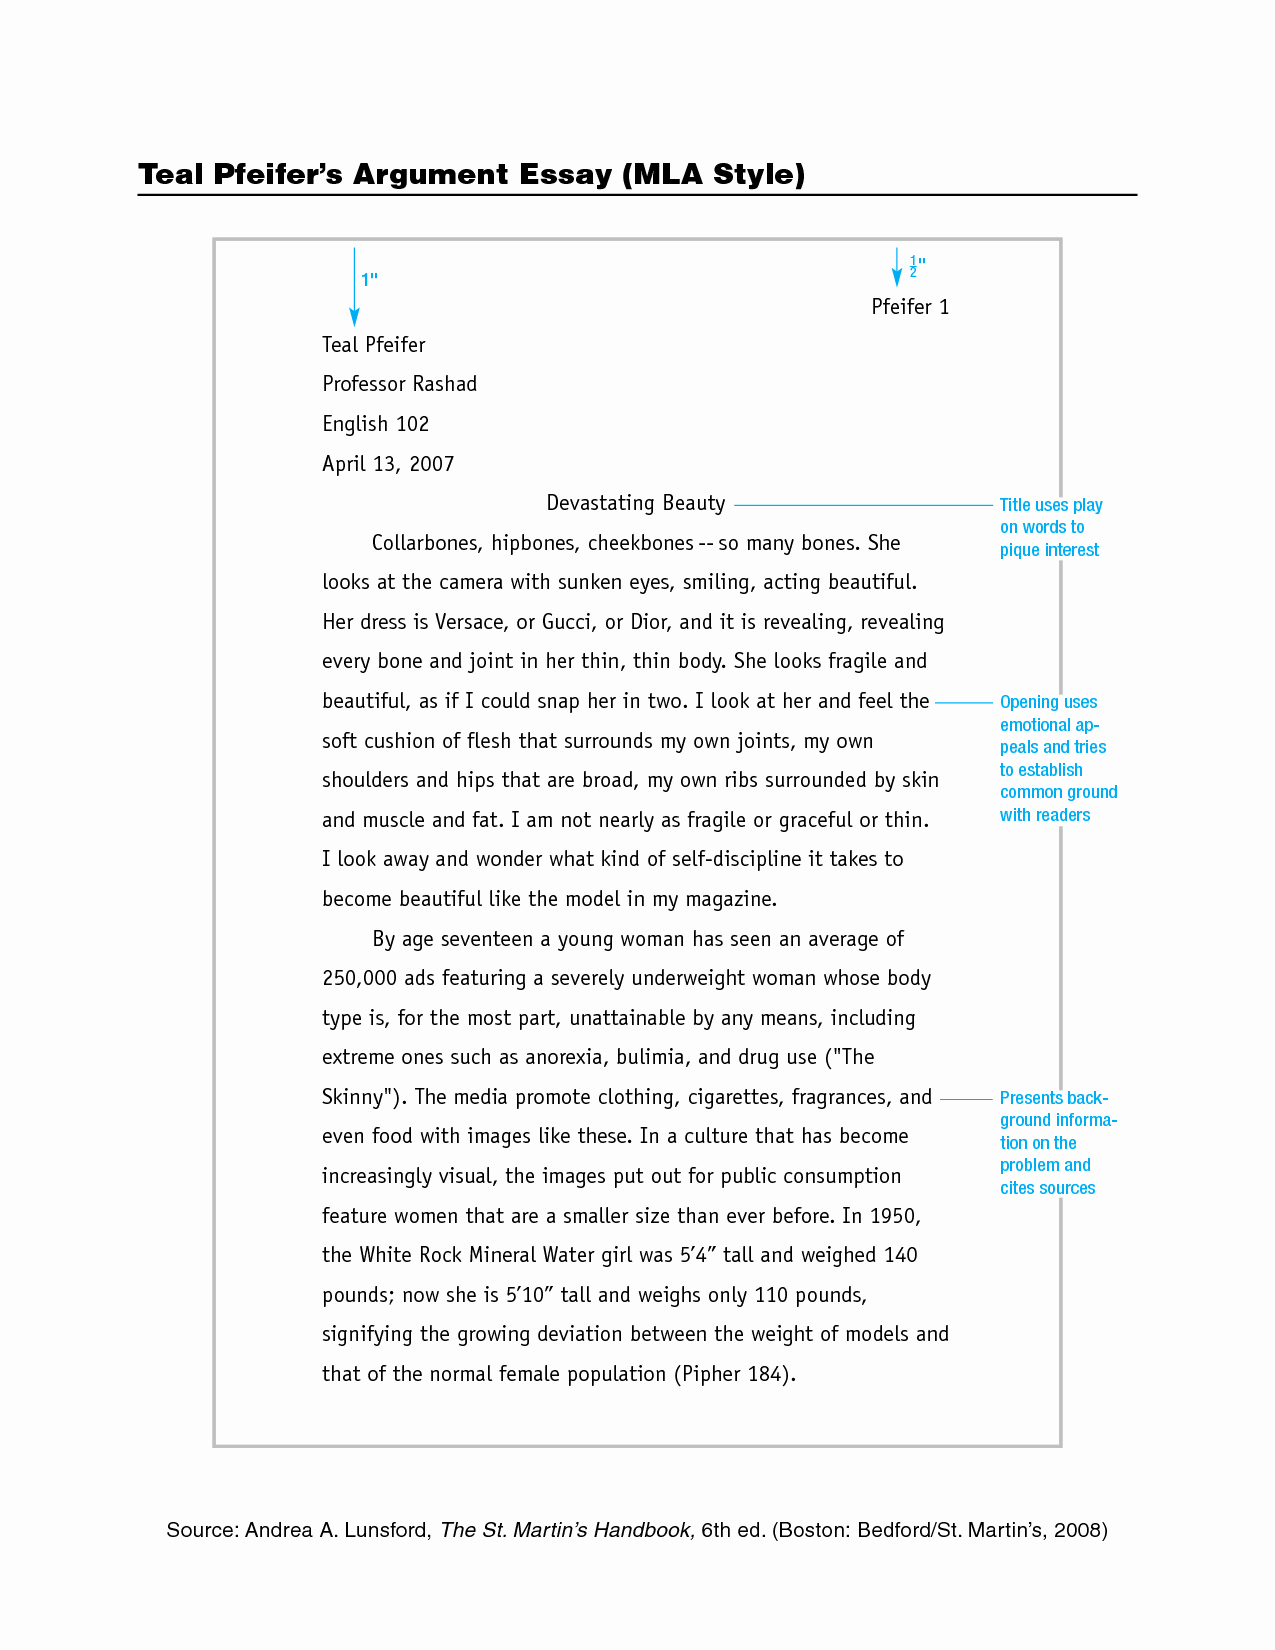 Mla format for Research Papers Elegant Best S Of College Essay Mla format Example Mla